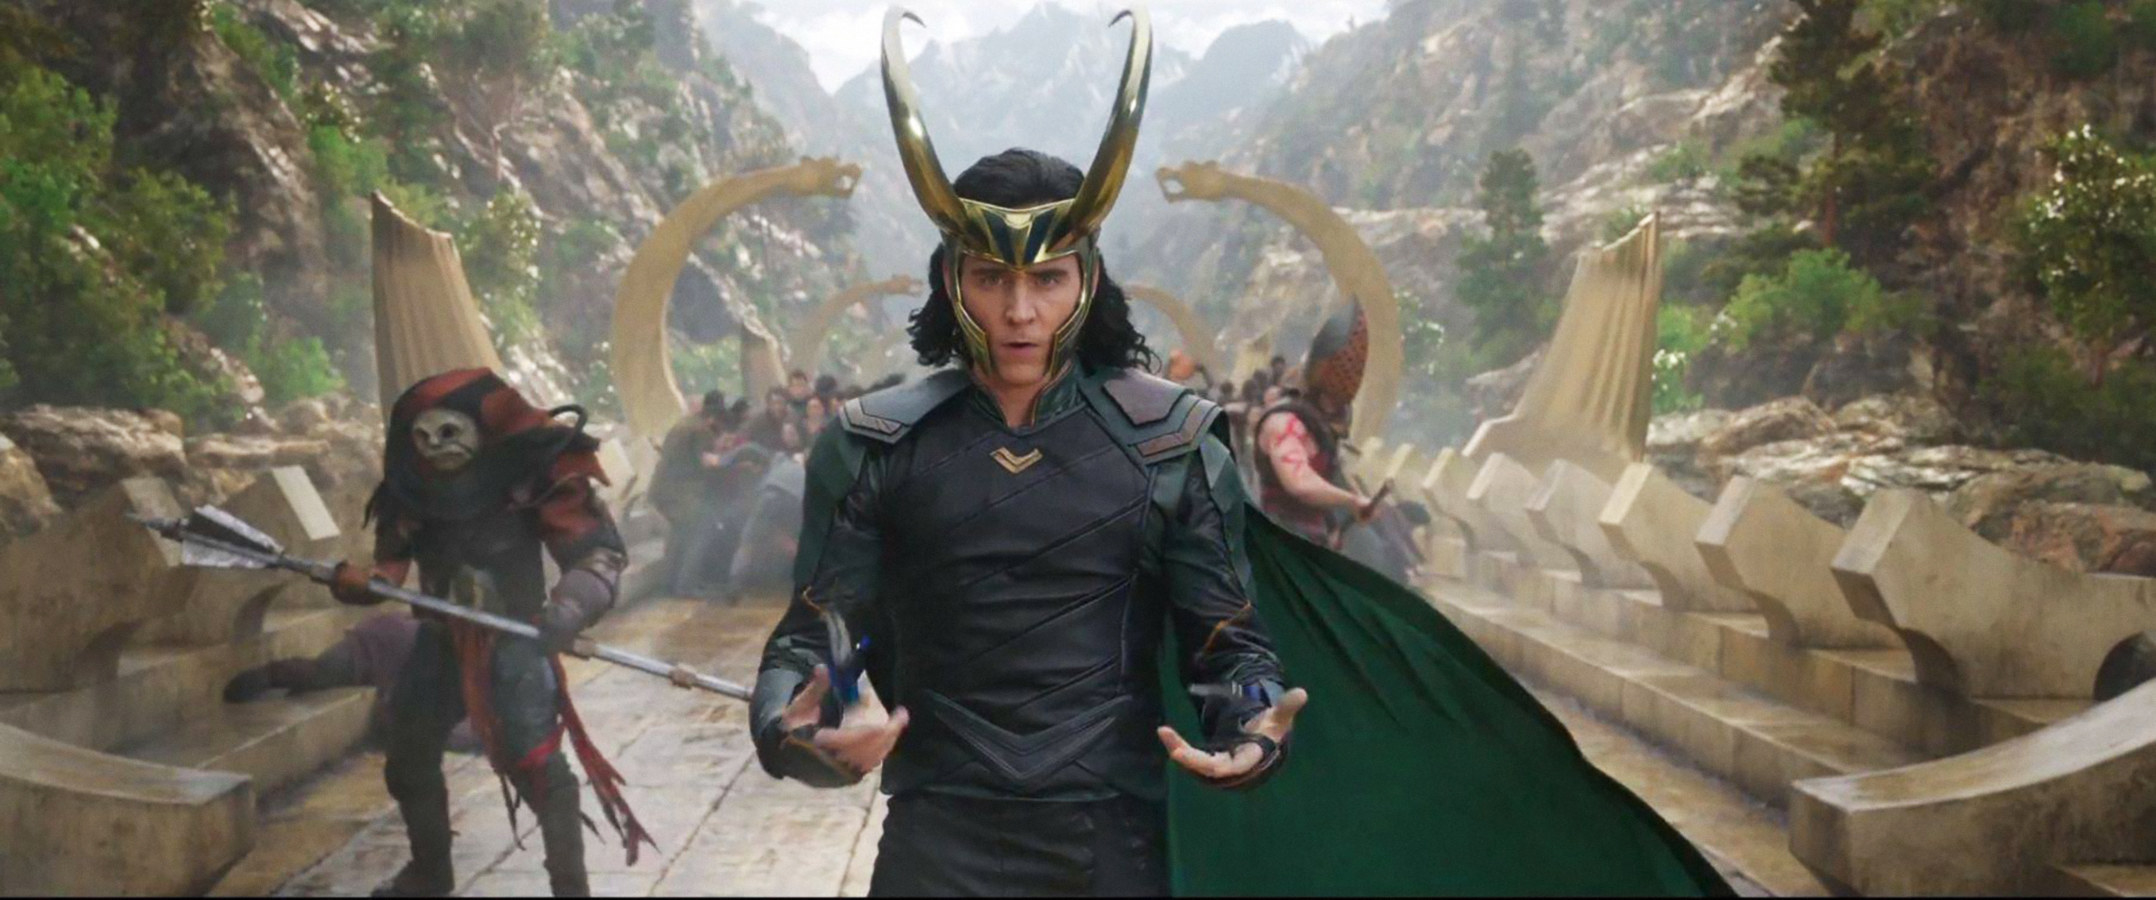 Loki on a bridge wearing a cape and horns